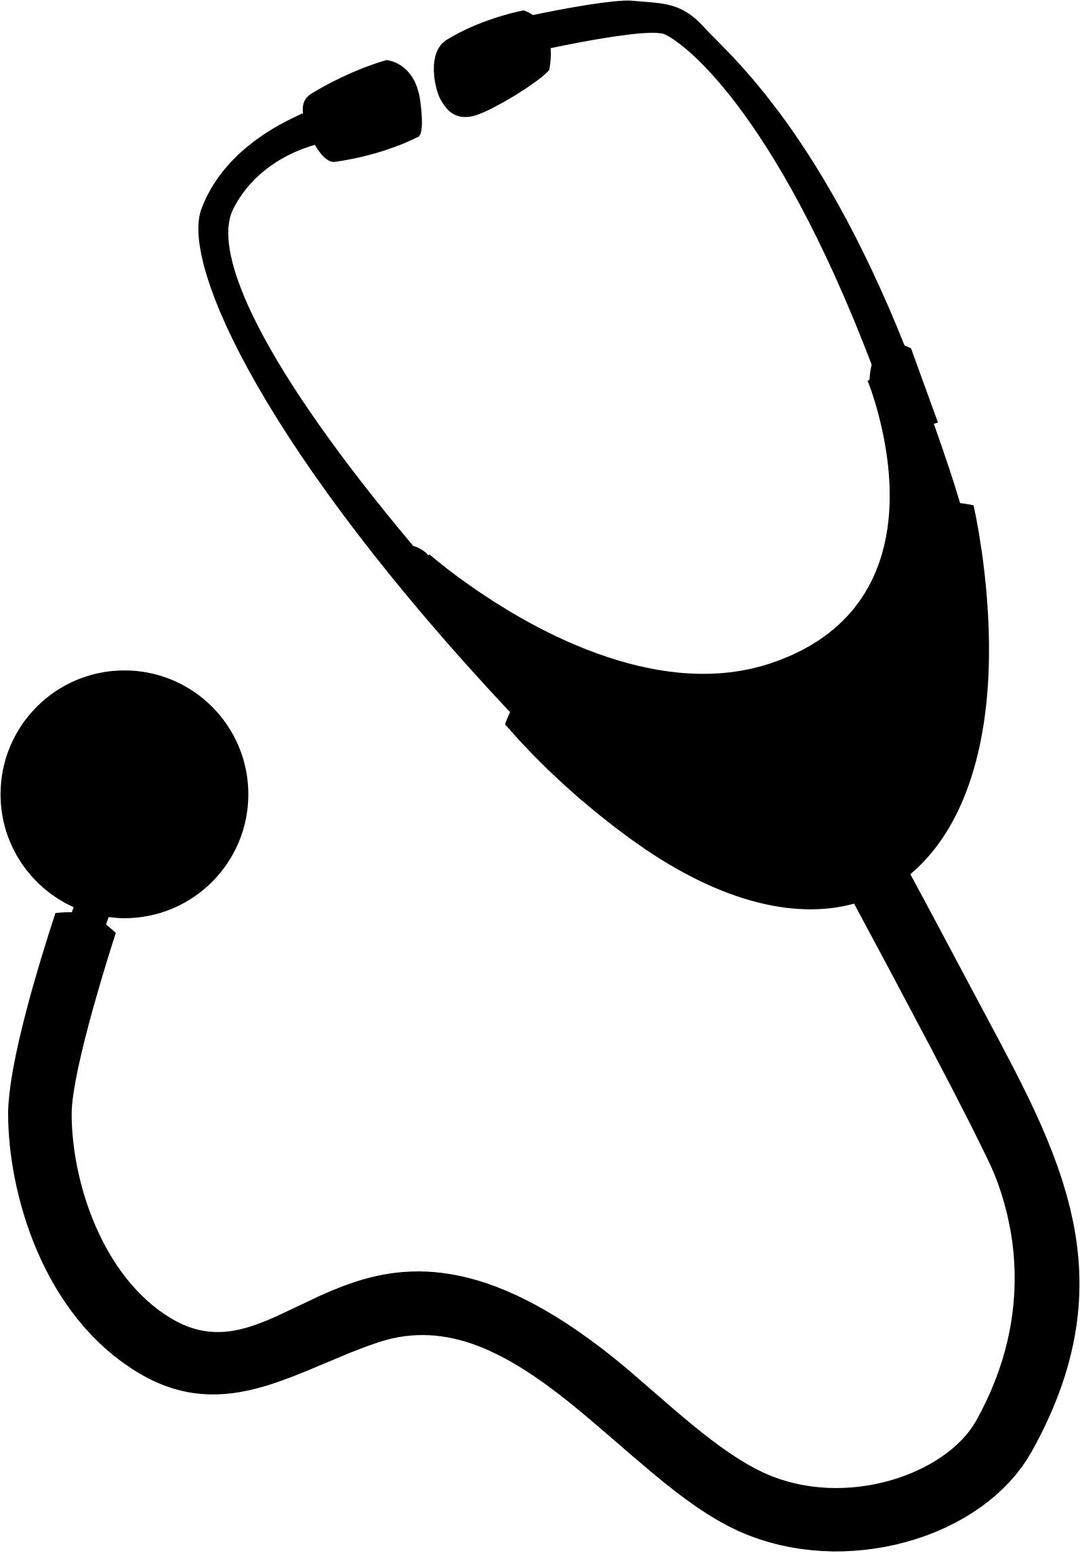 NASA Stethoscope Silhouette png transparent